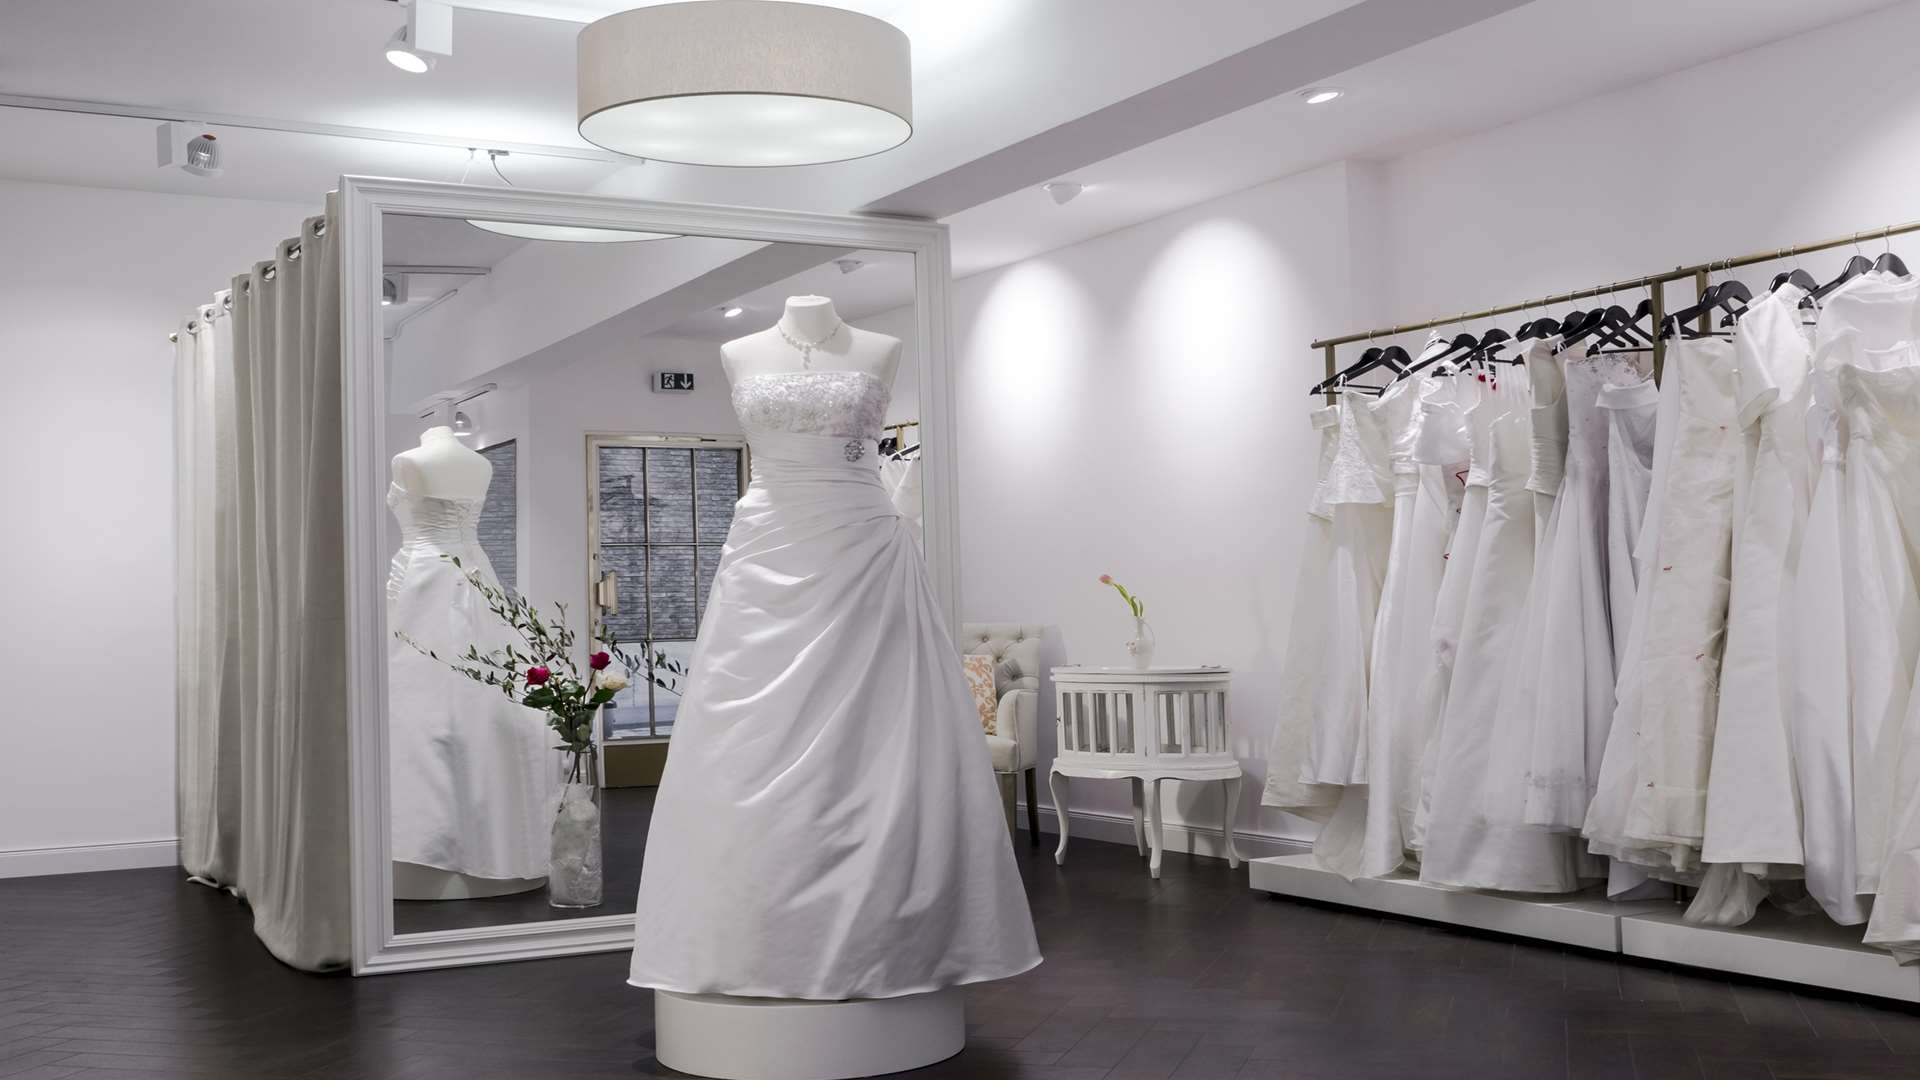 Gown and dress shops will be on hand to help you find the perfect dress.